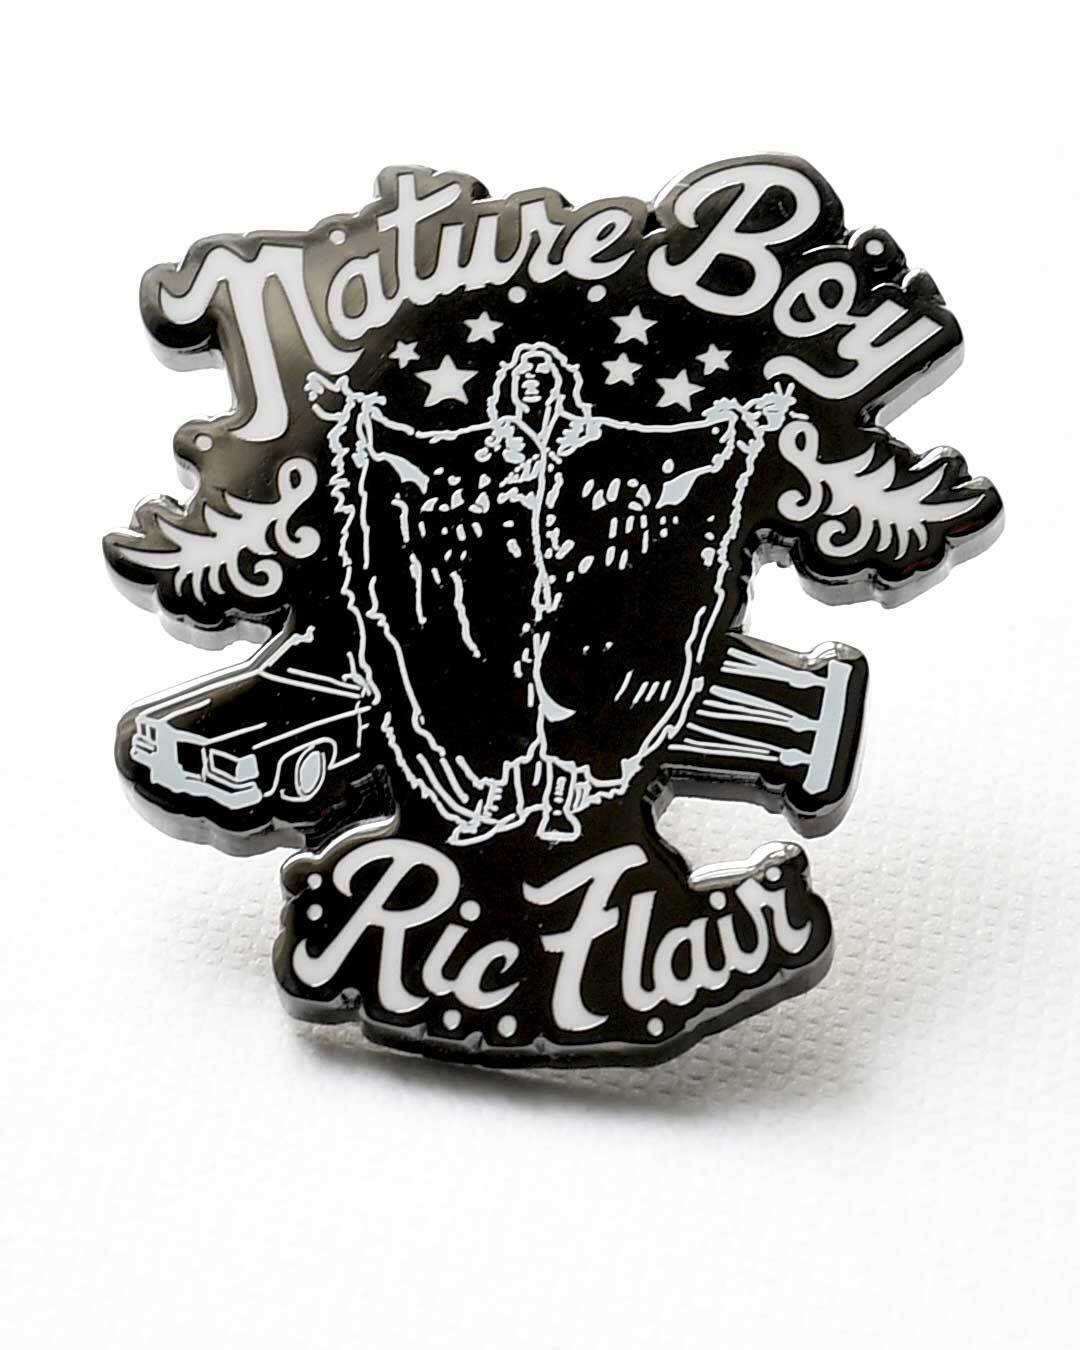 Ric Flair Nature Boy Pin - Roots of Fight Canada